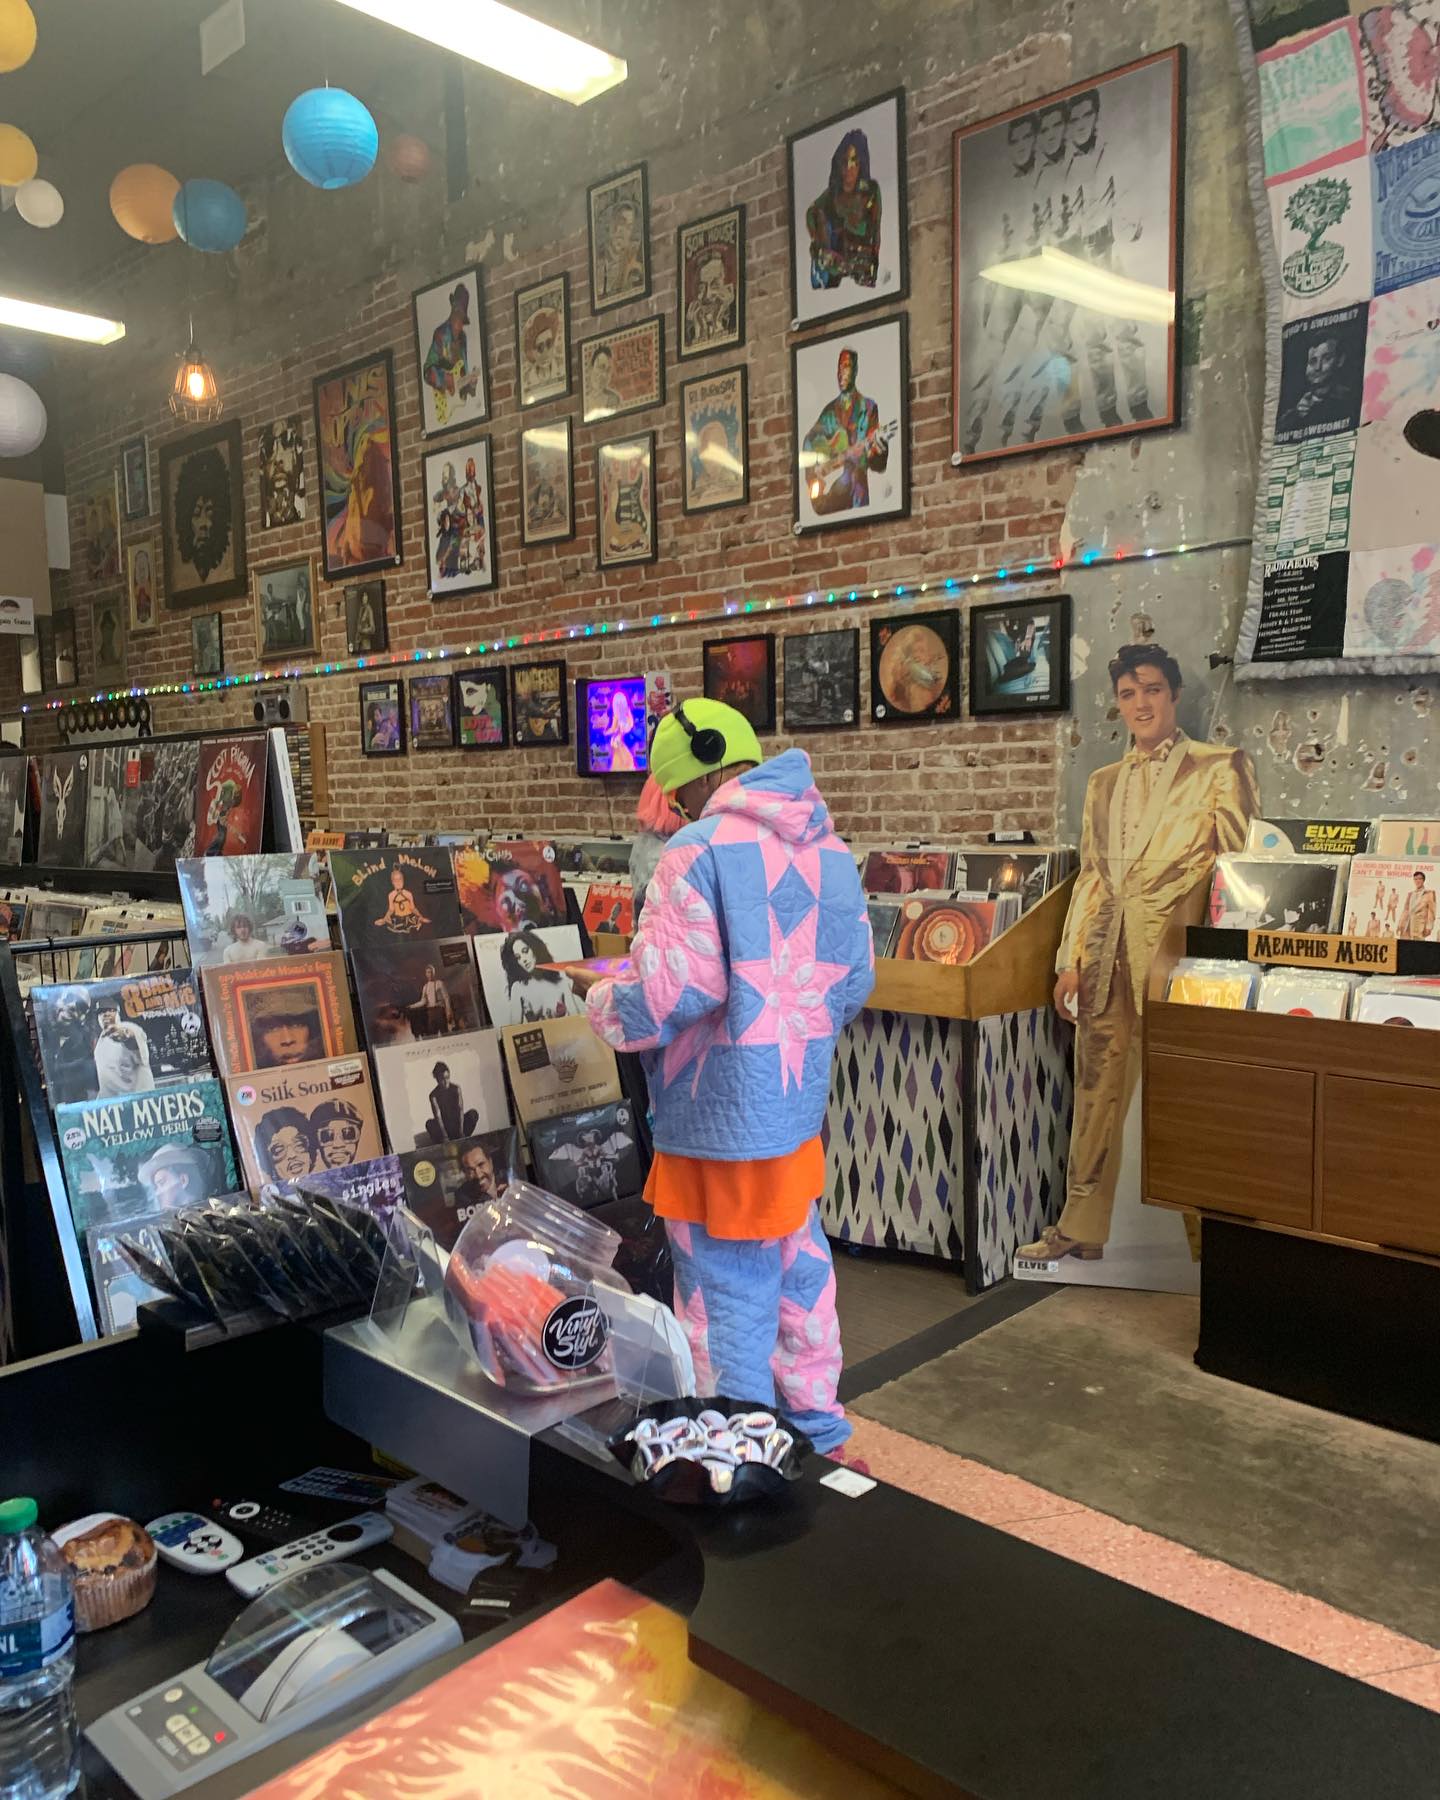 A person in a colorful costume inside a record store in Memphis, standing near posters and vinyl records, with a cardboard cutout of Elvis Presley in the background.